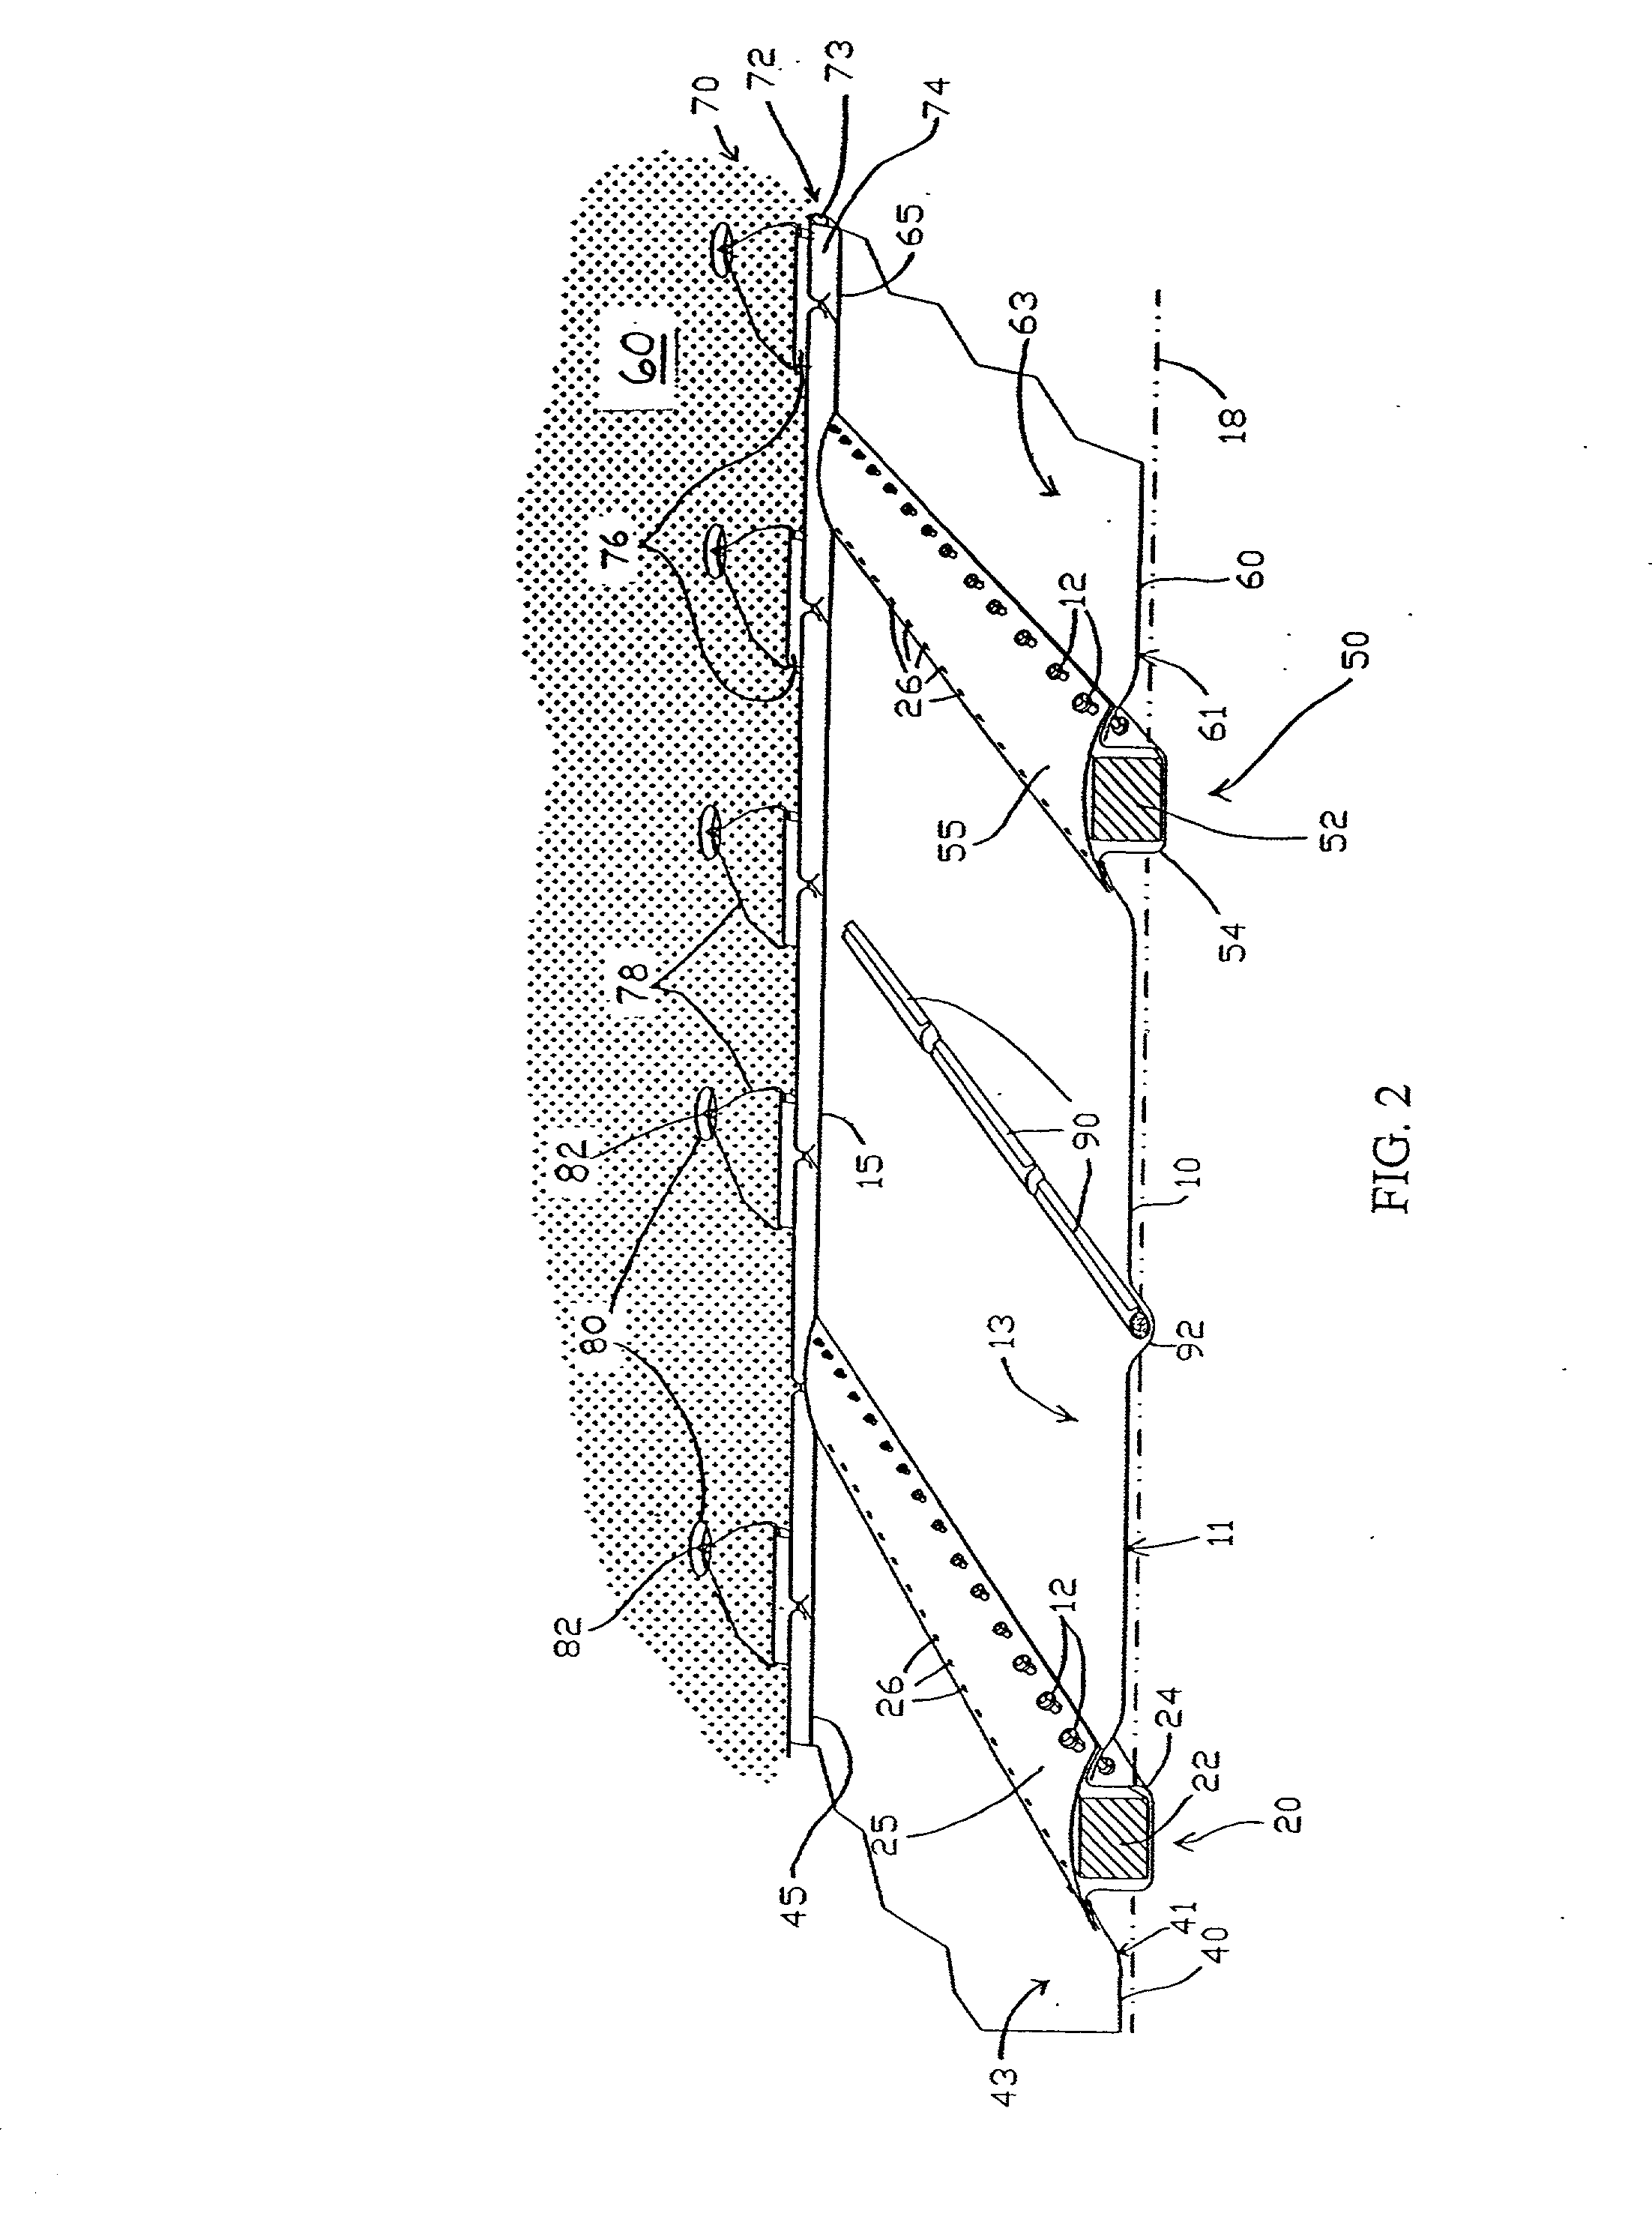 Covering systems and venting methods